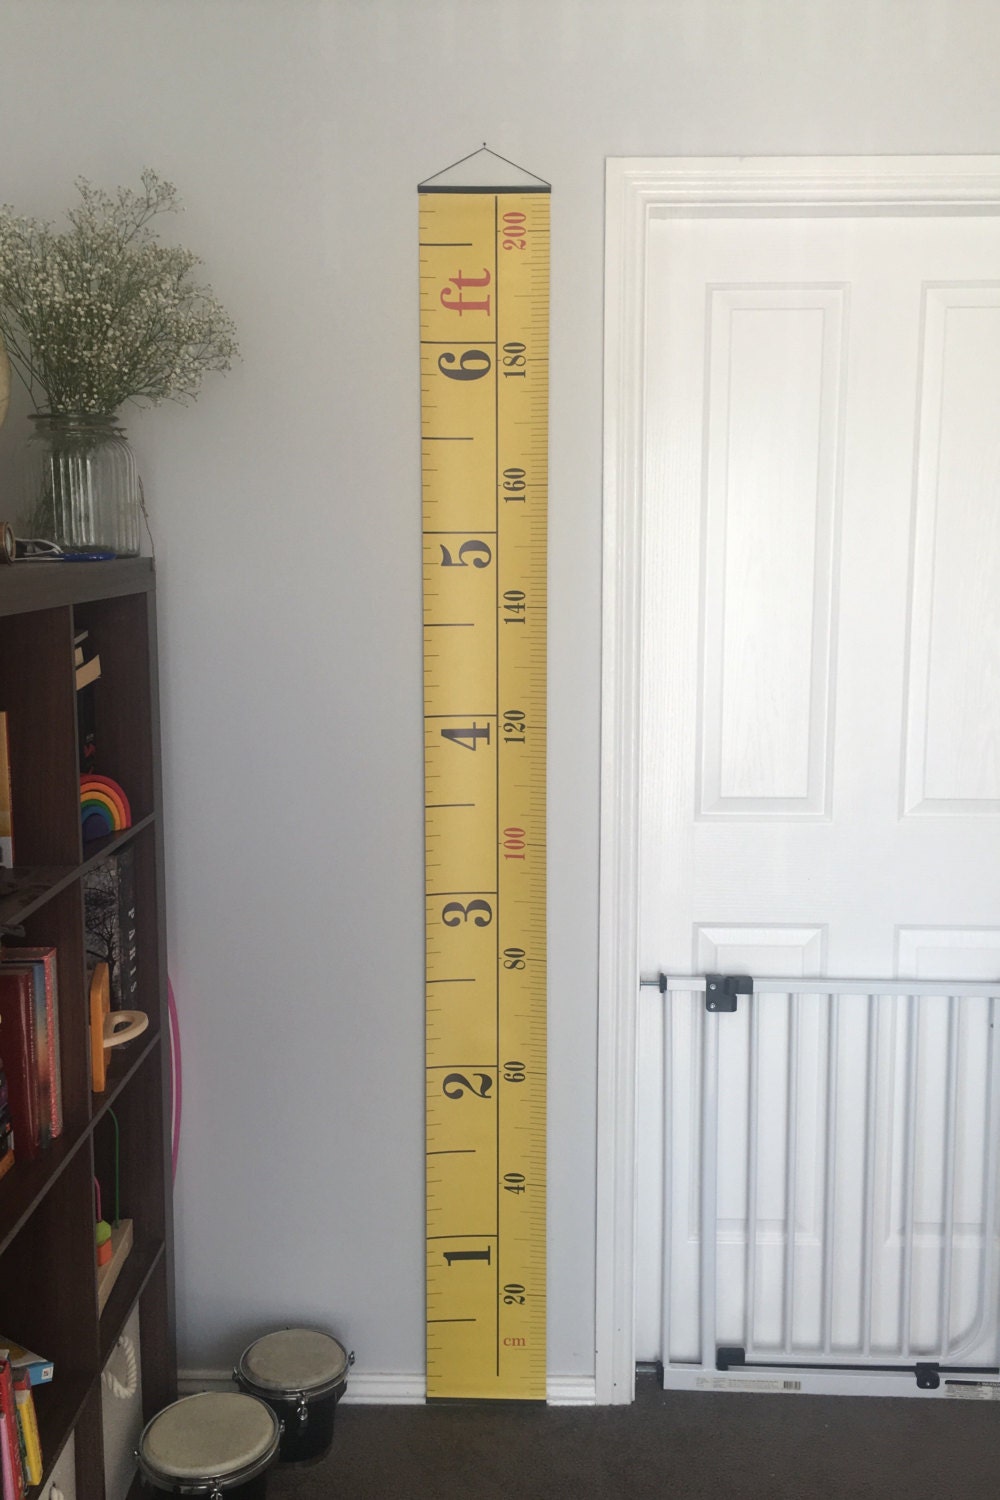 how to measure your height without measuring tape